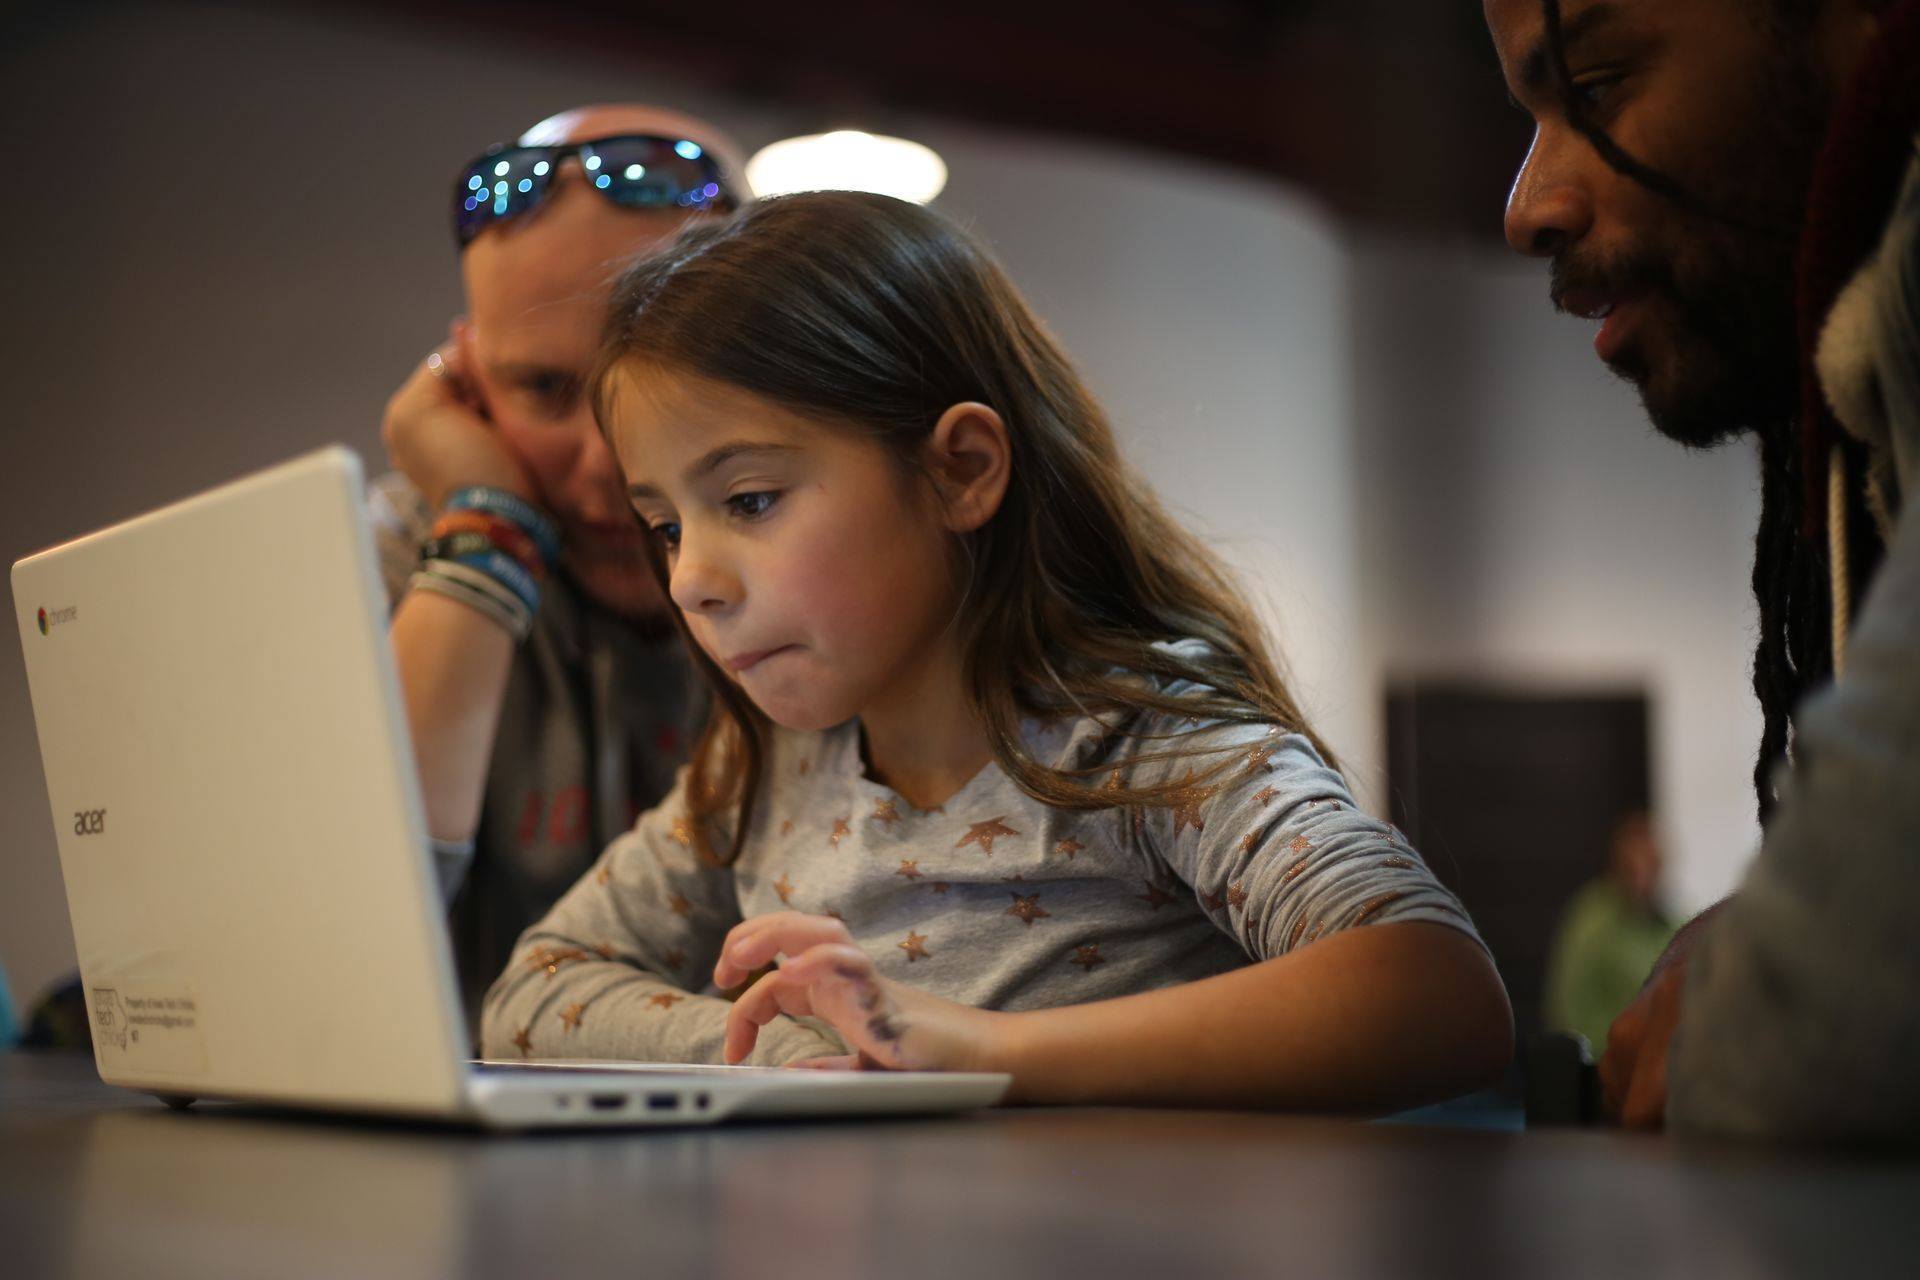 A young CoderDojo participant and two volunteers gather around a laptop to work through a code challenge at one of the stations.